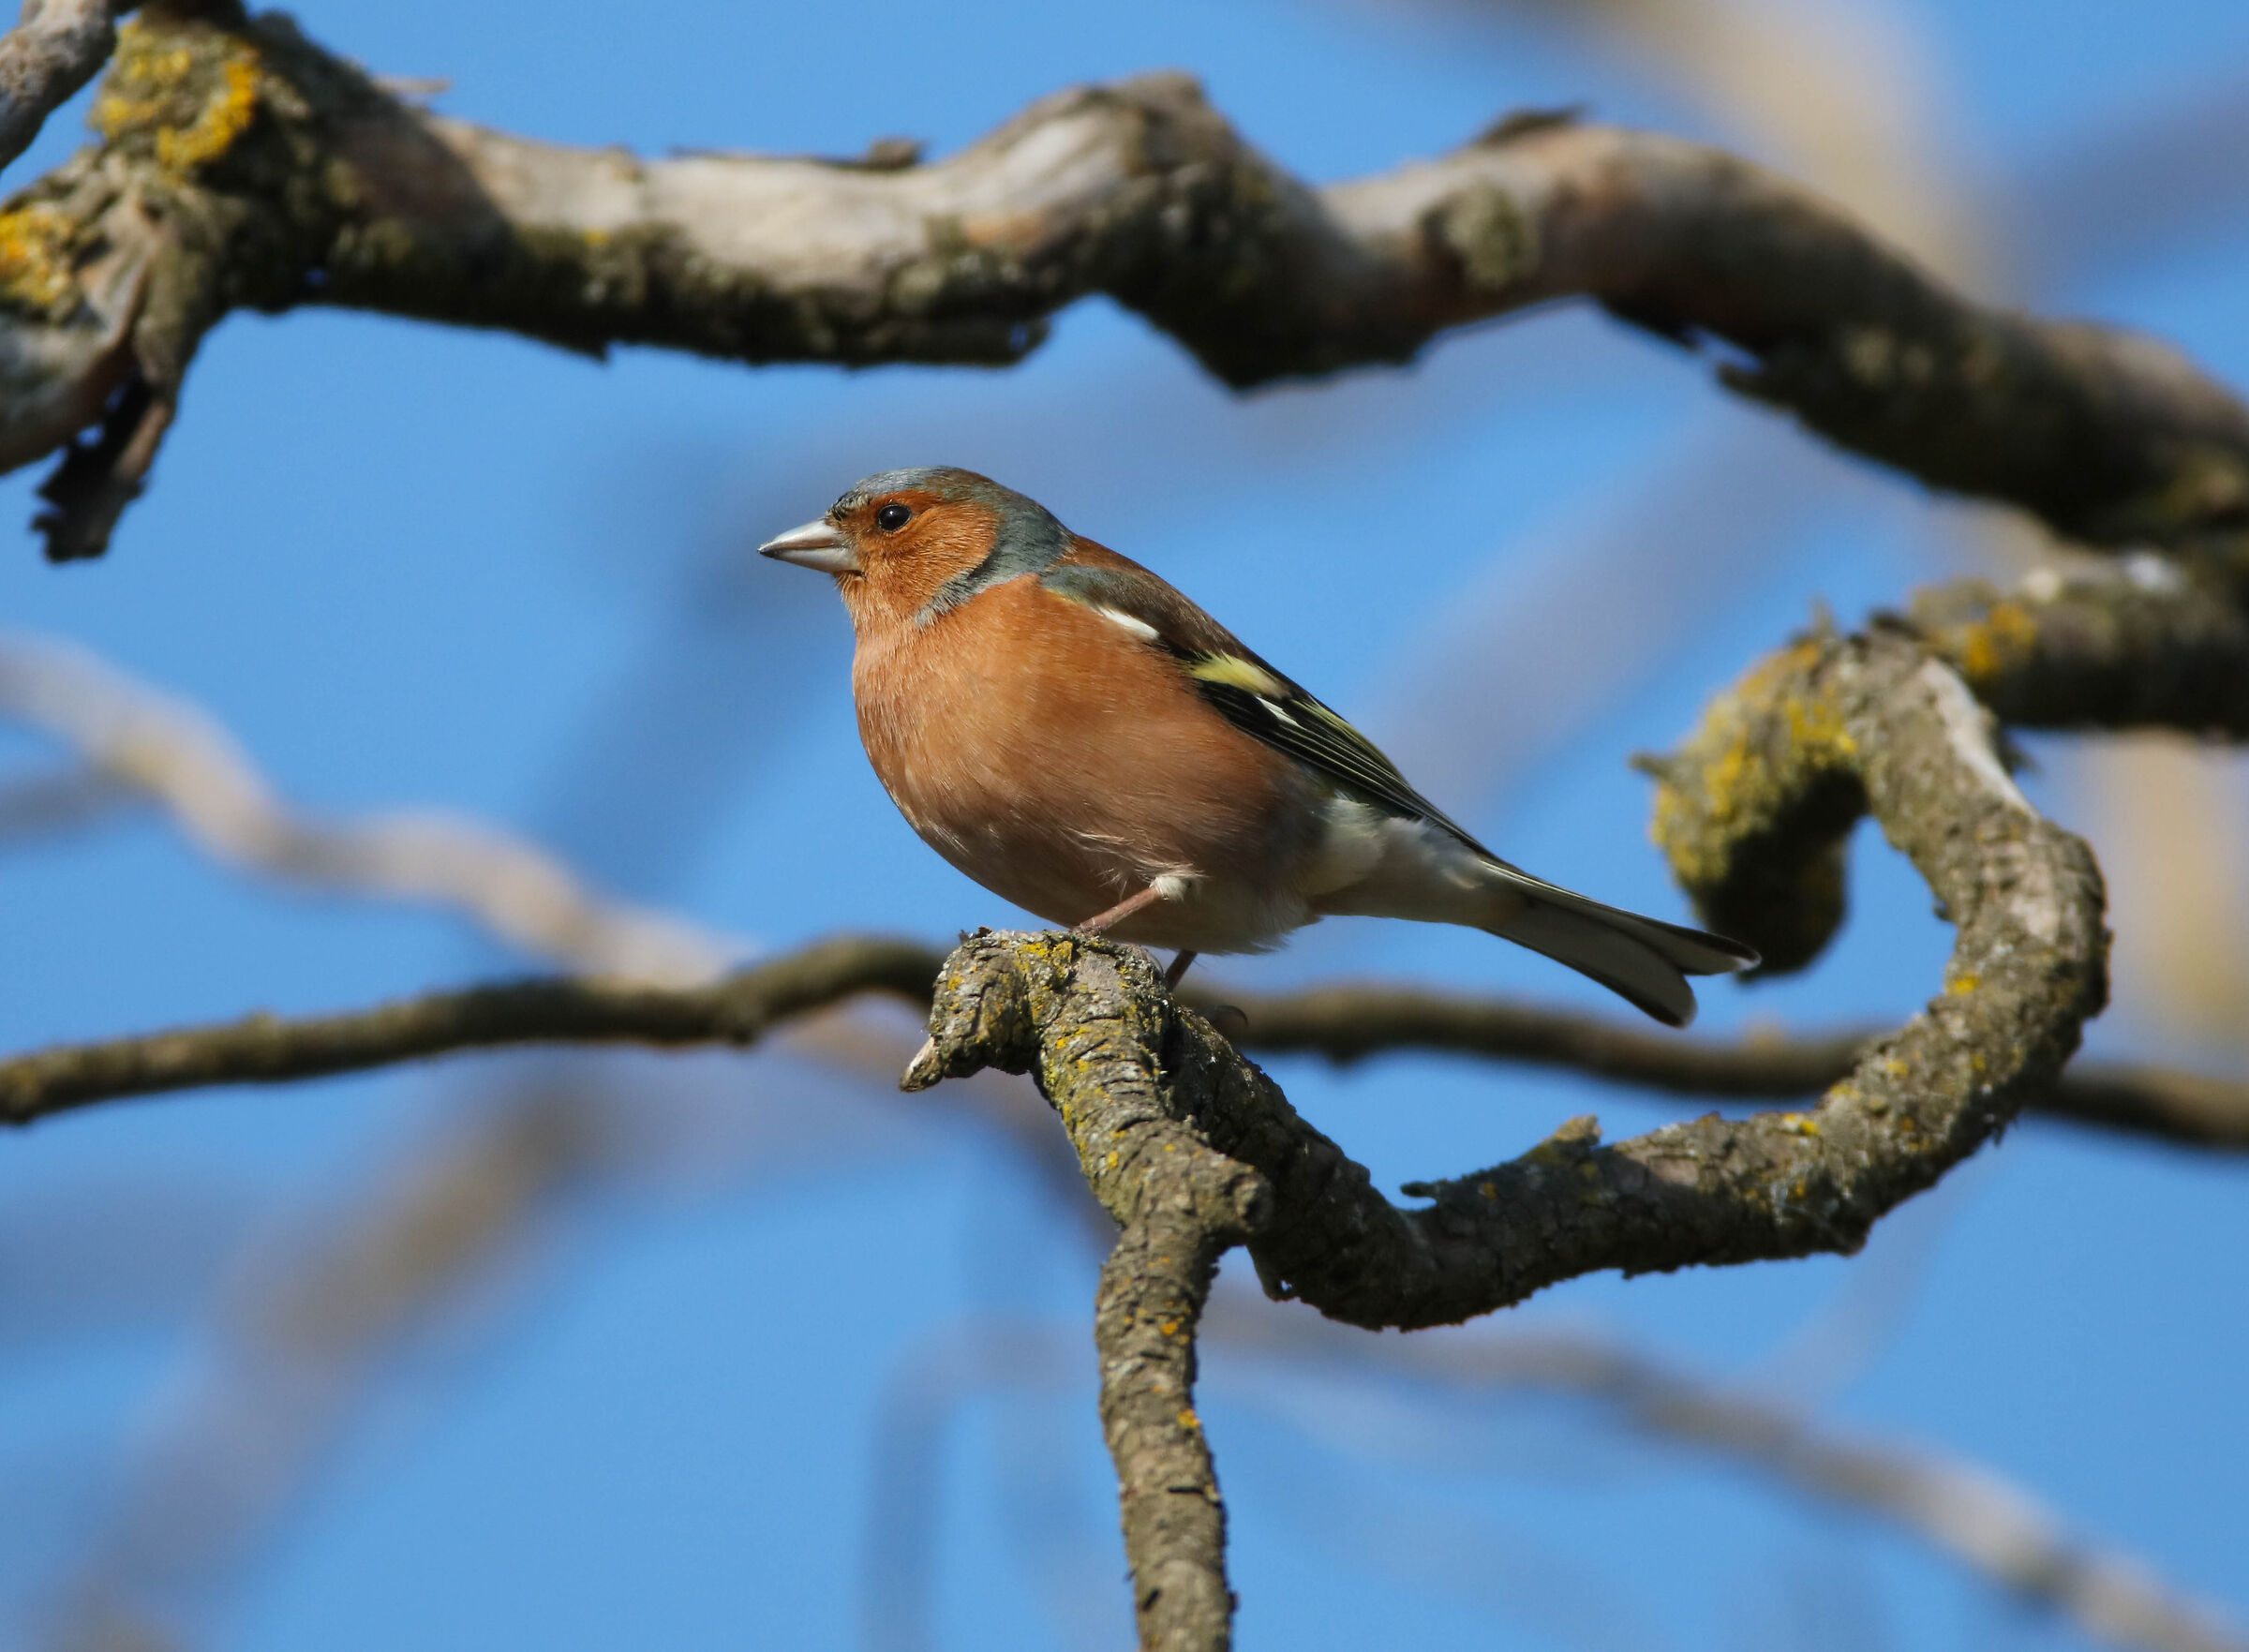 The favorite chaffinch roost...